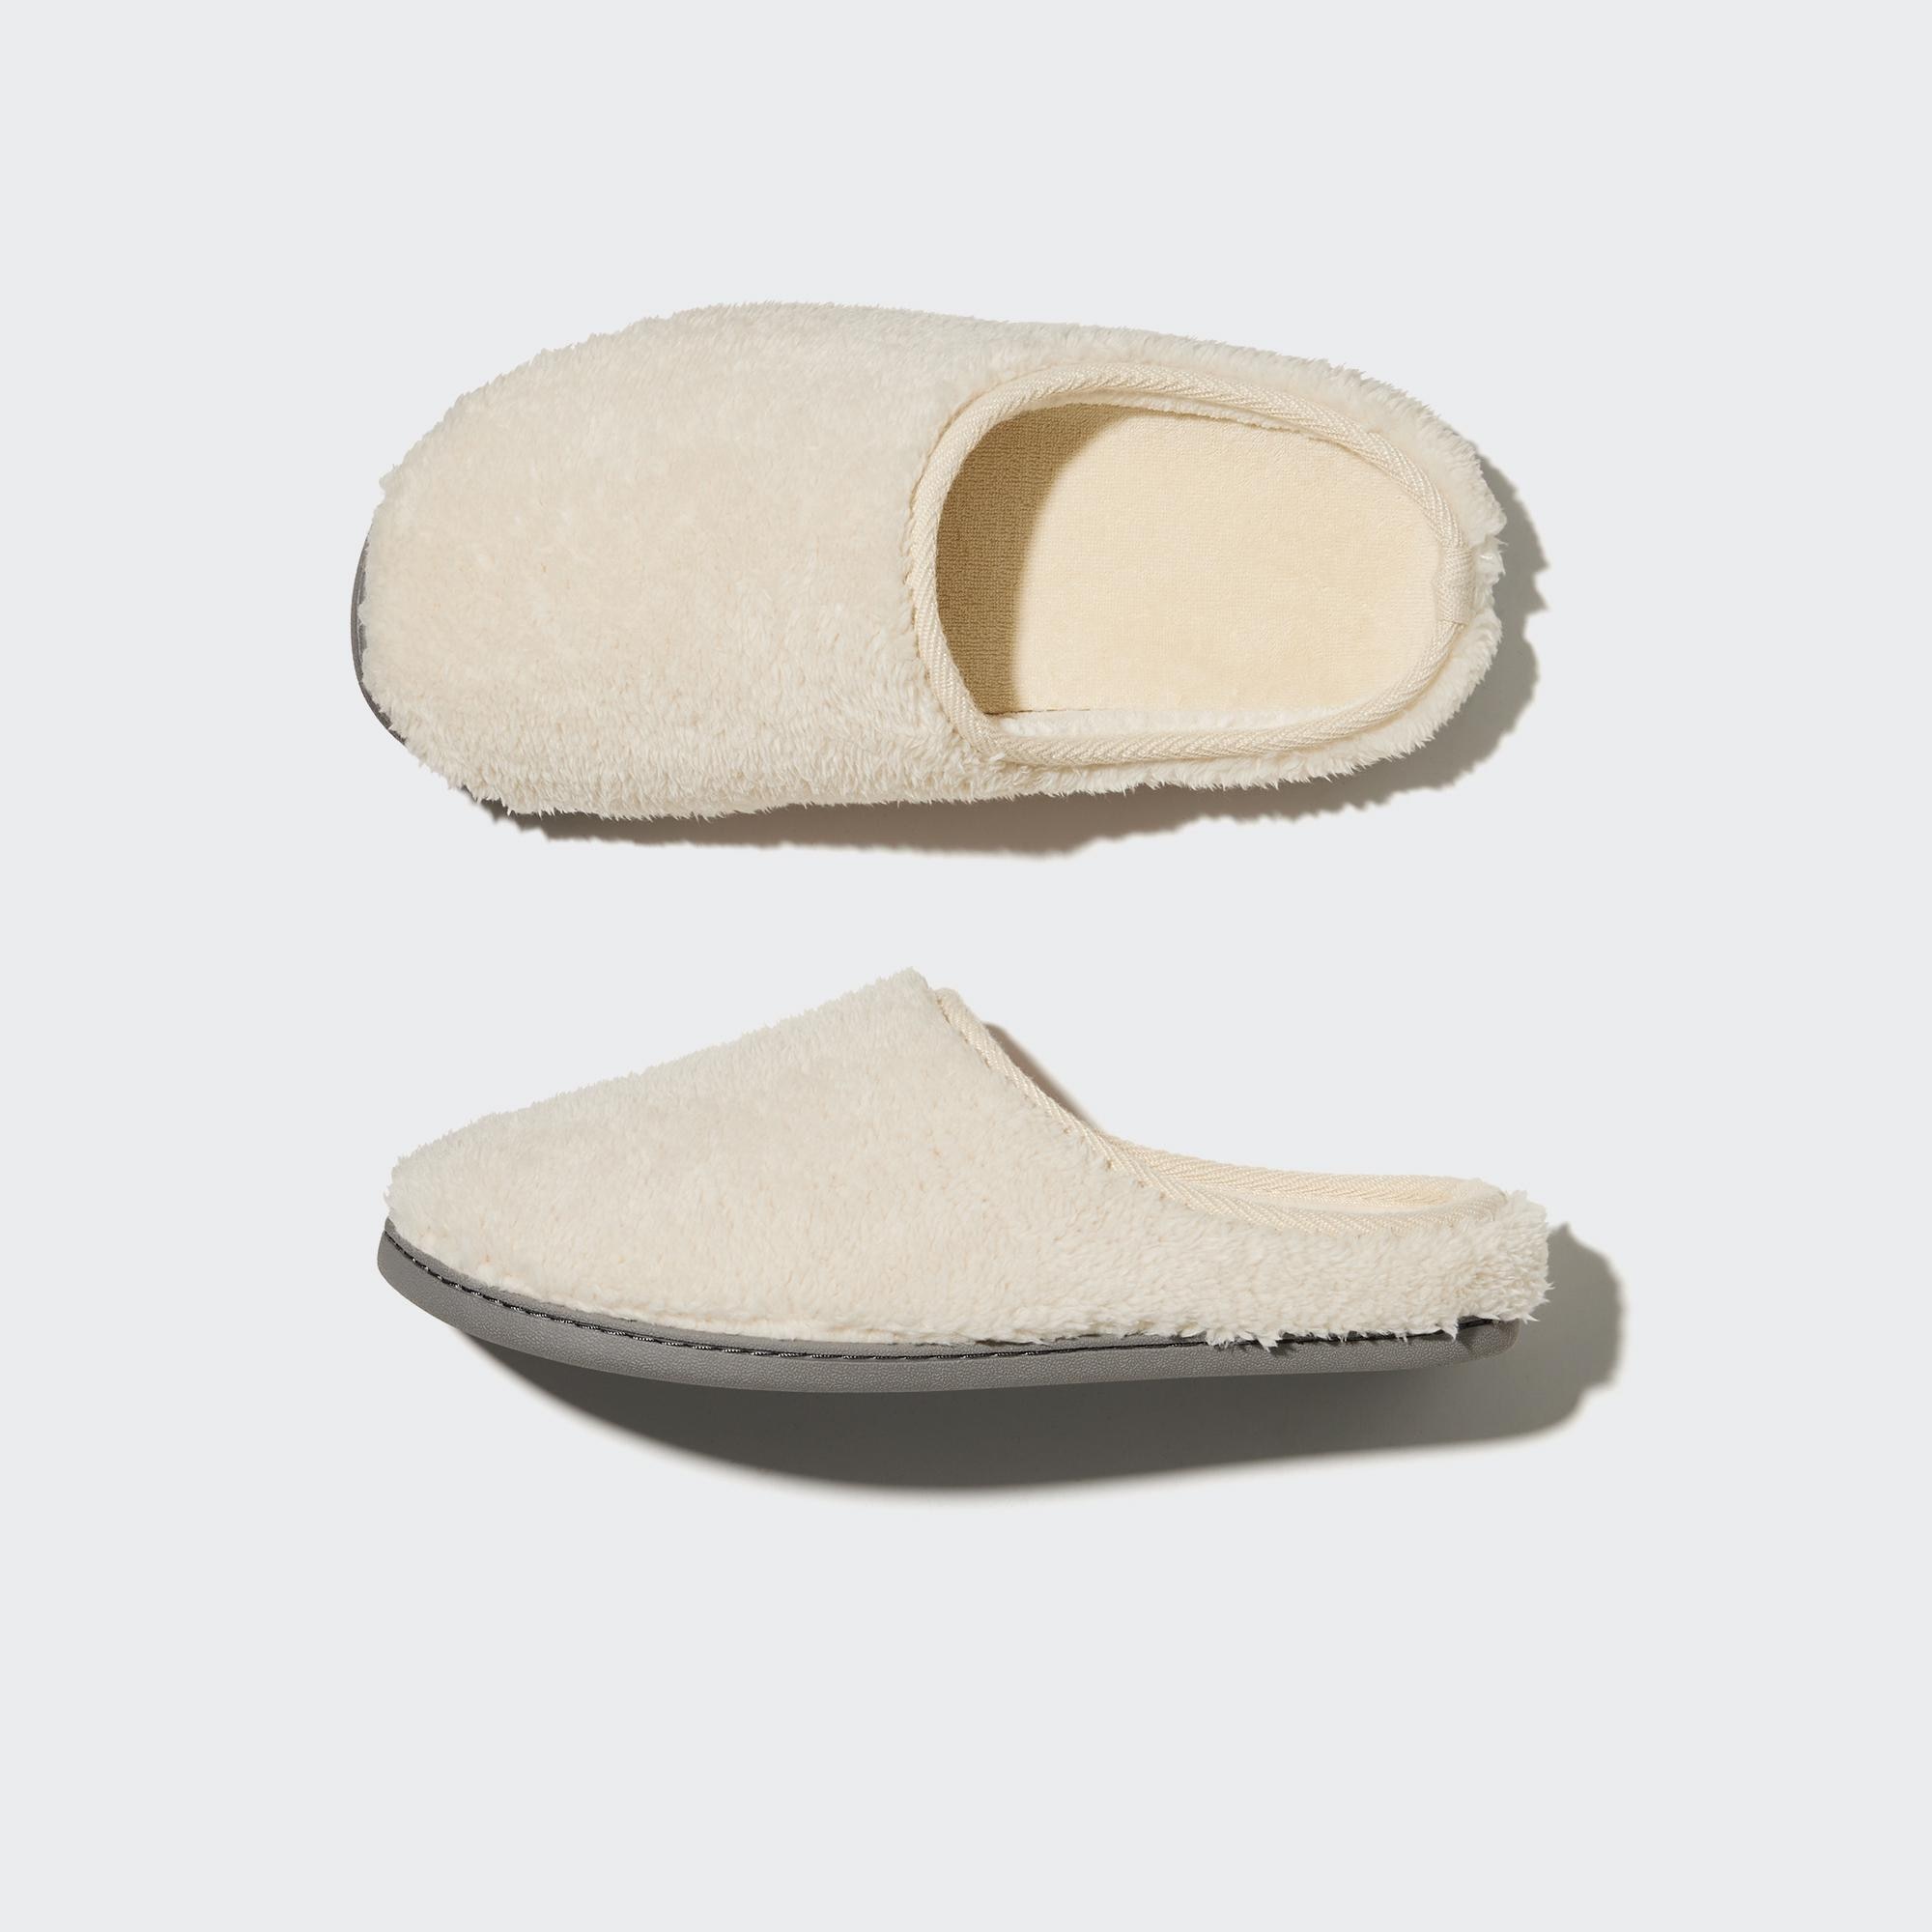 Top more than 158 uniqlo slippers - esthdonghoadian